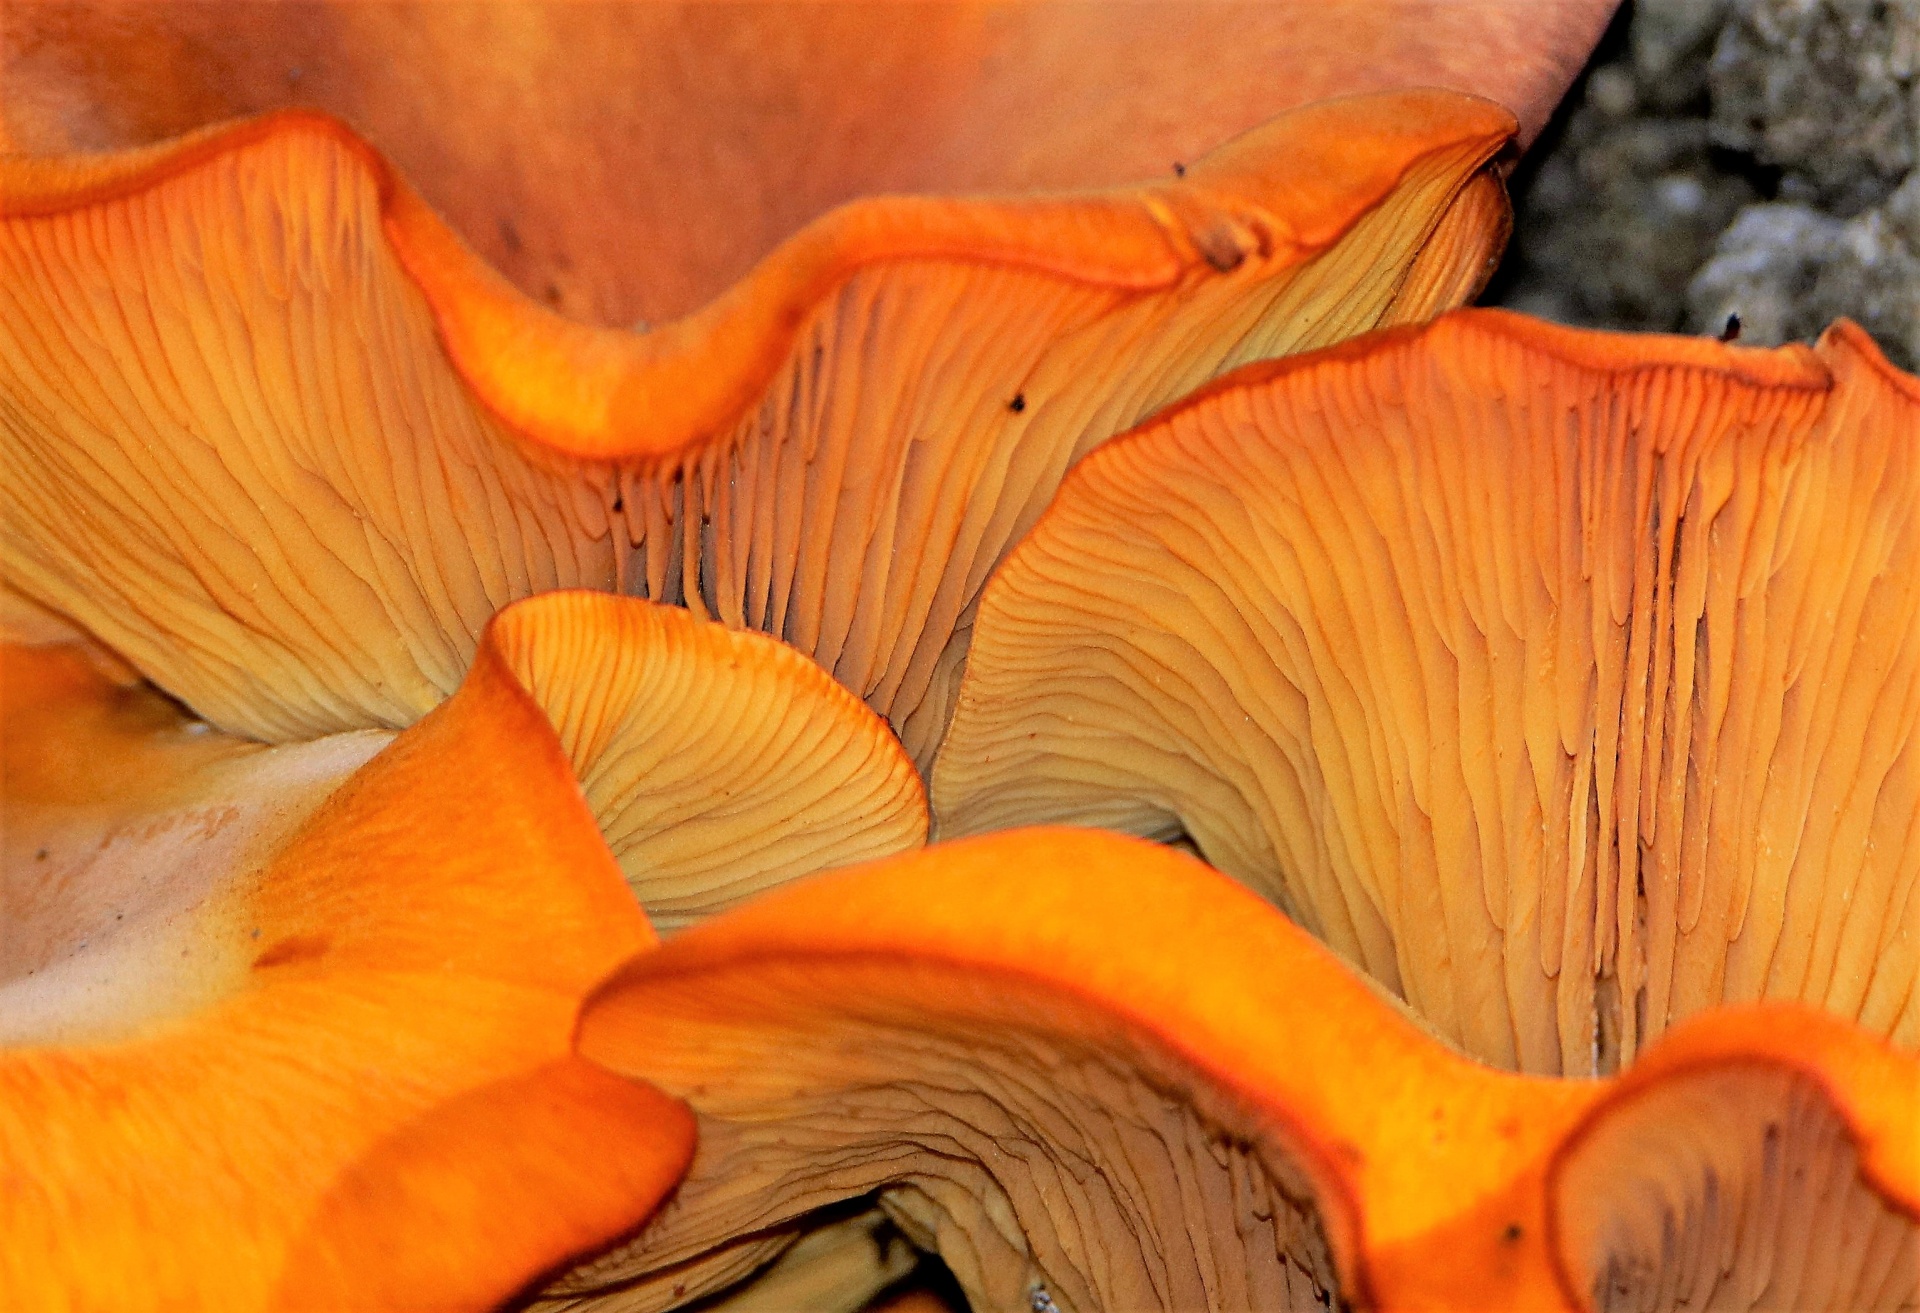 Abstract close-up of wavy orange chanterelle mushrooms, with emphasis on gills.